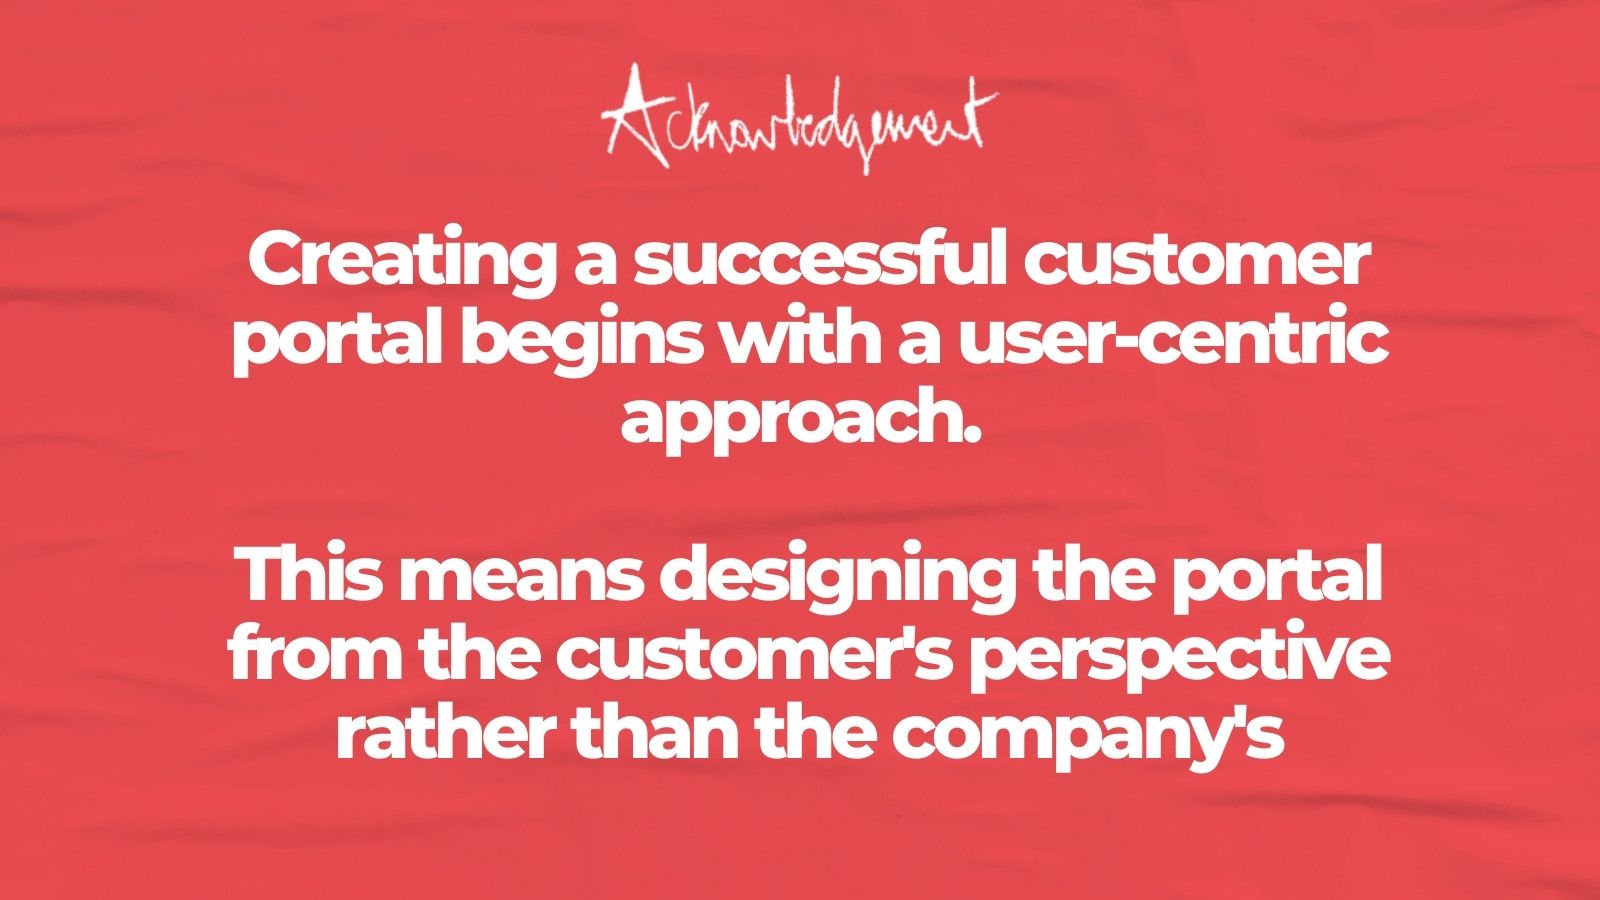 Creating a successful customer portal begins with a user-centric approach. This means designing the portal from the customer's perspective rather than the company's